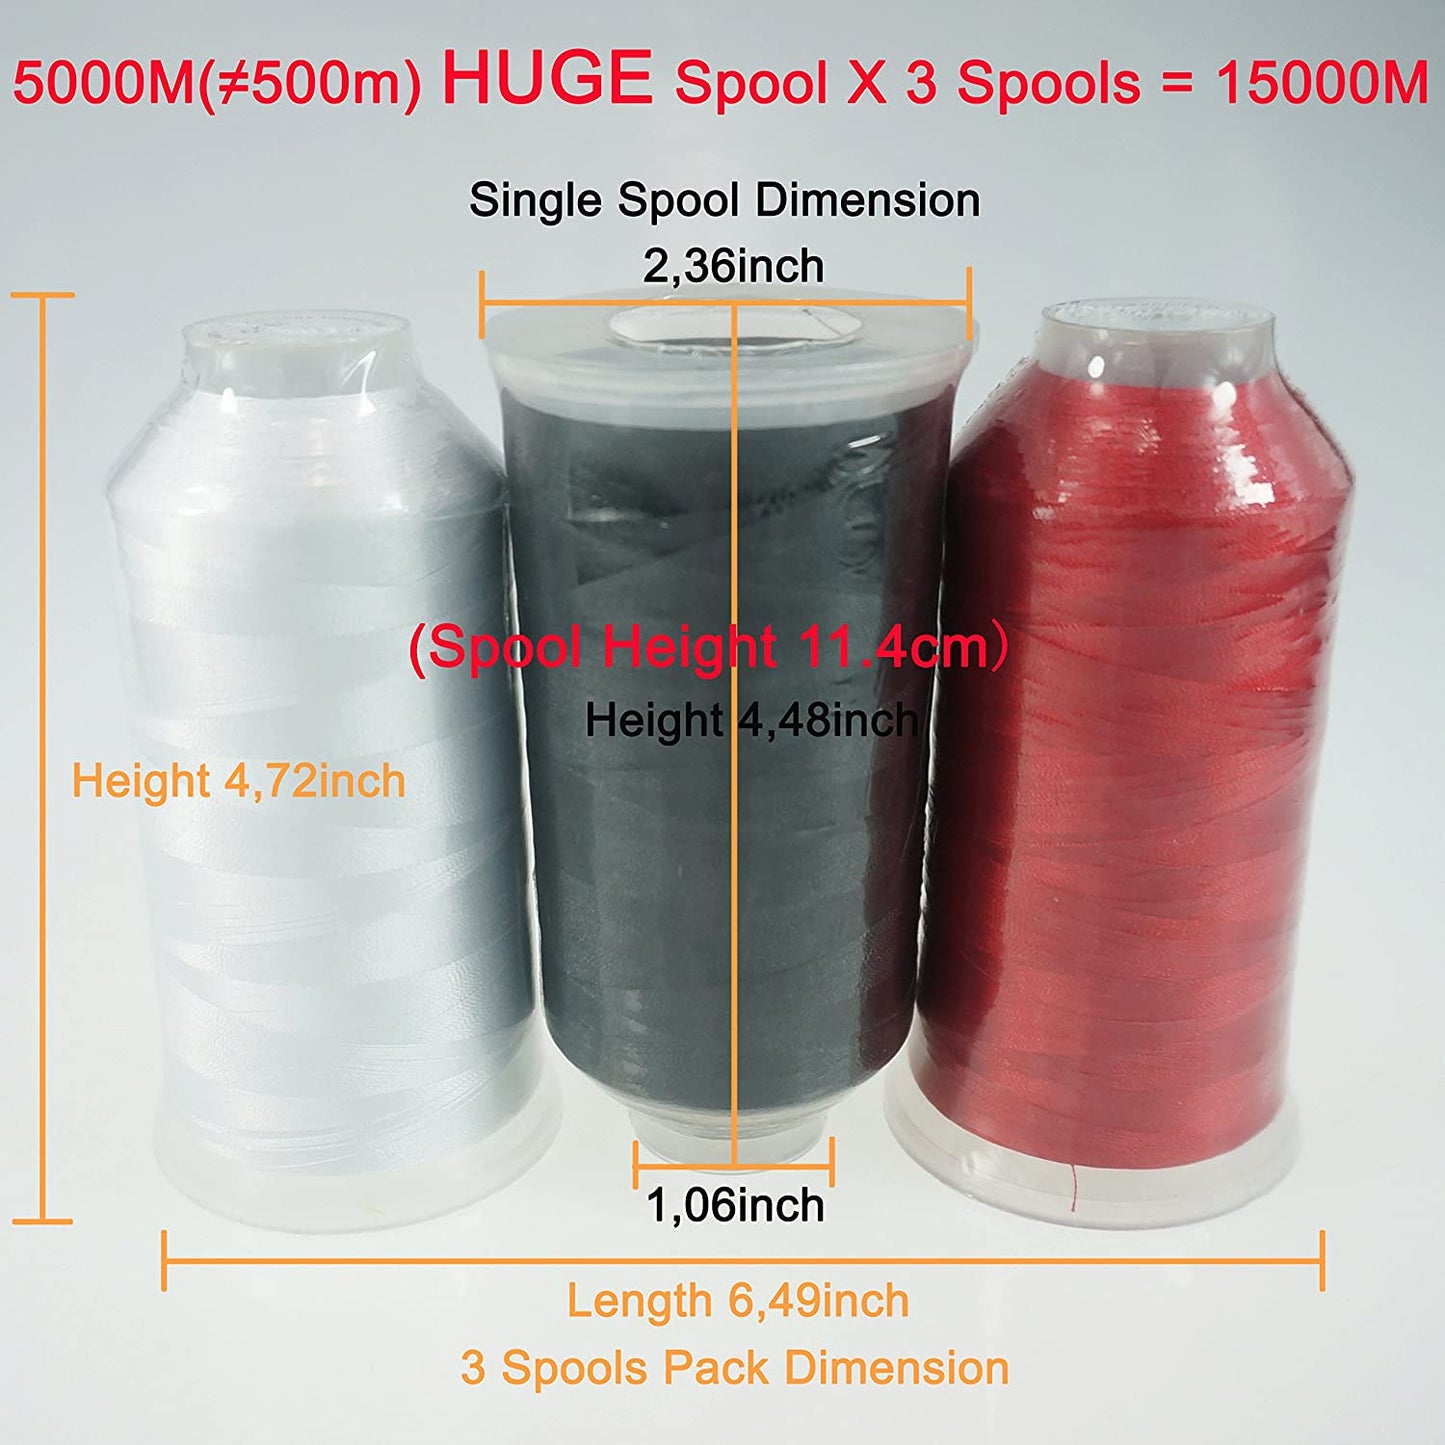 New brothread - 32 Options- Various Assorted Color Packs of Polyester Embroidery Machine Thread Huge Spool 5000M for All Embroidery Machines